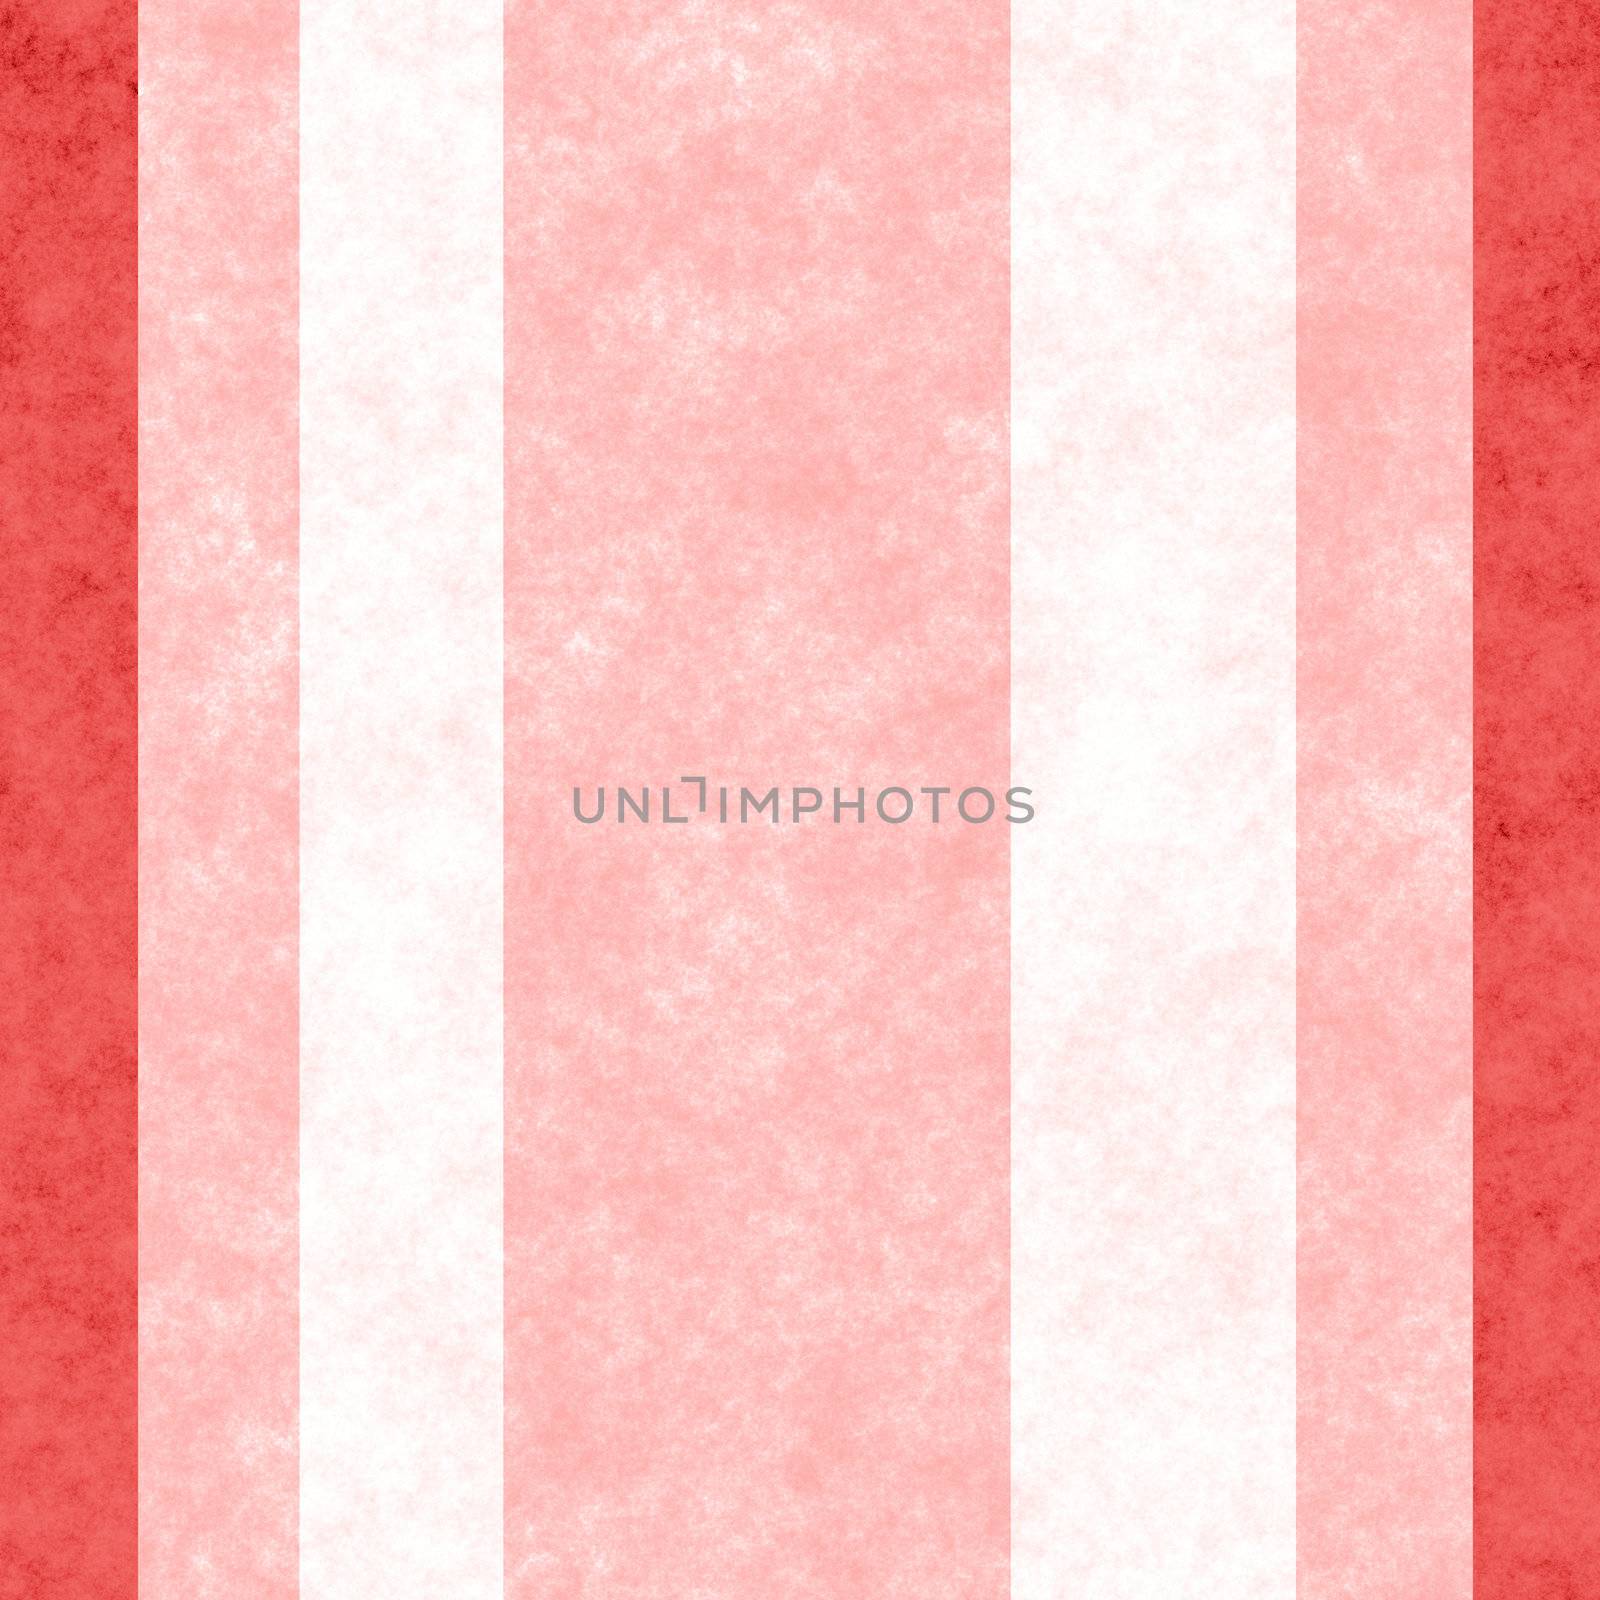 red grunge wallpaper stripes that tile seamlessly as a pattern

